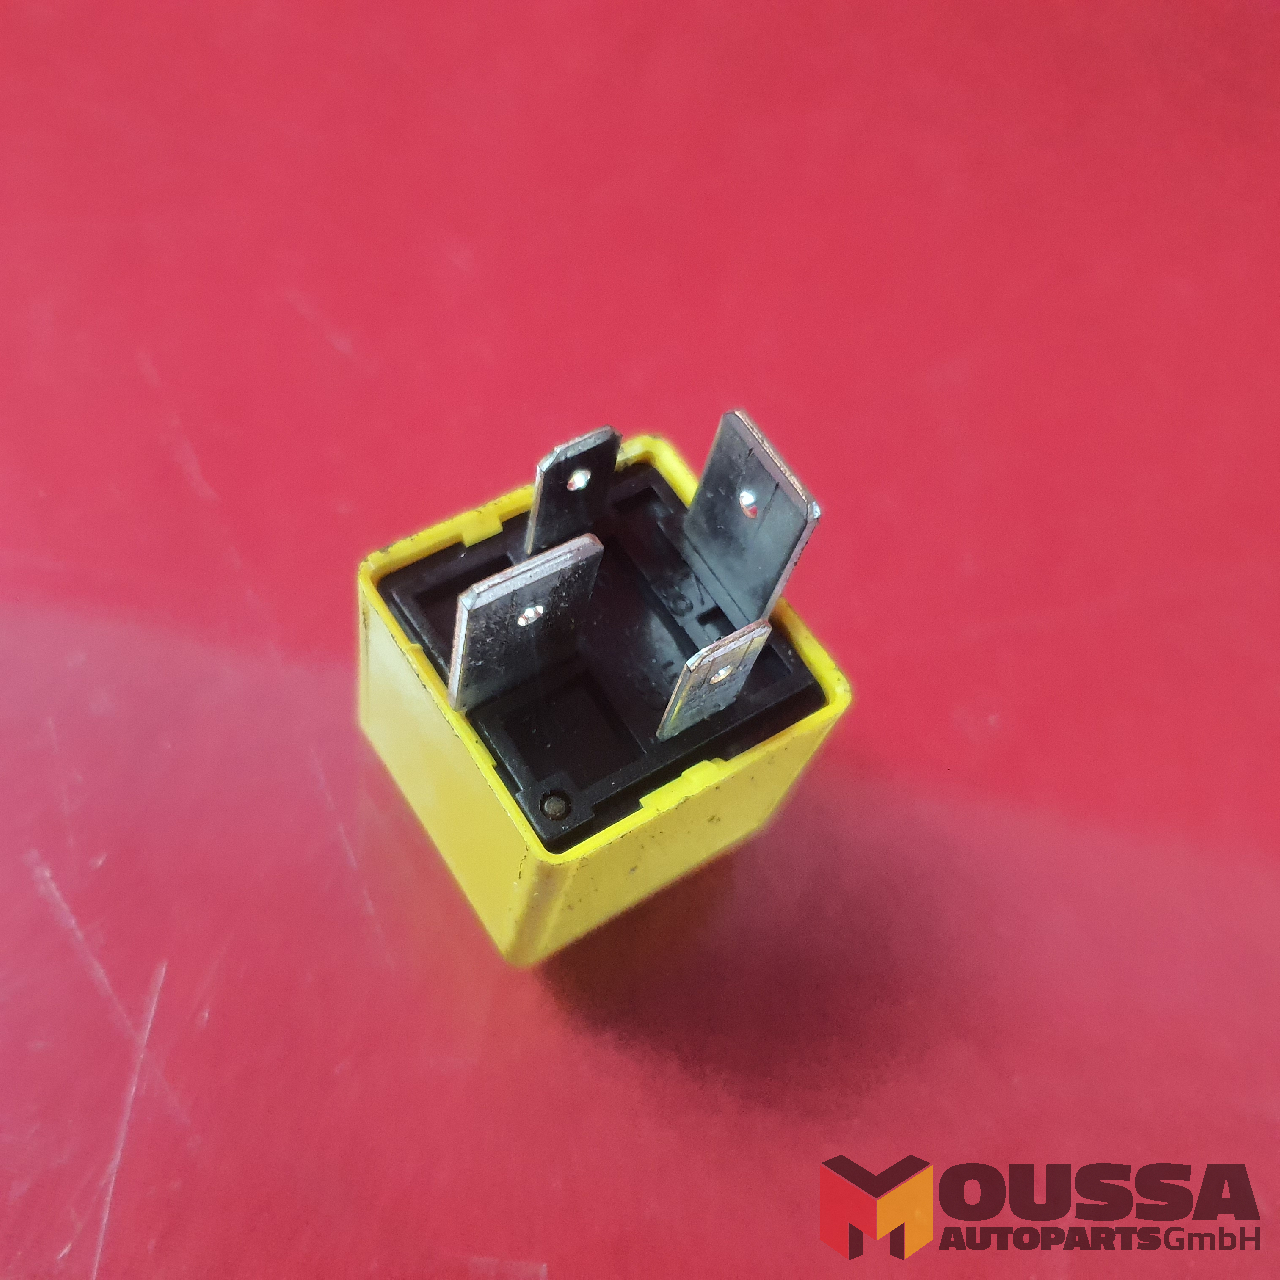 MOUSSA-AUTOPARTS-65aede6b7a8aa.jpg